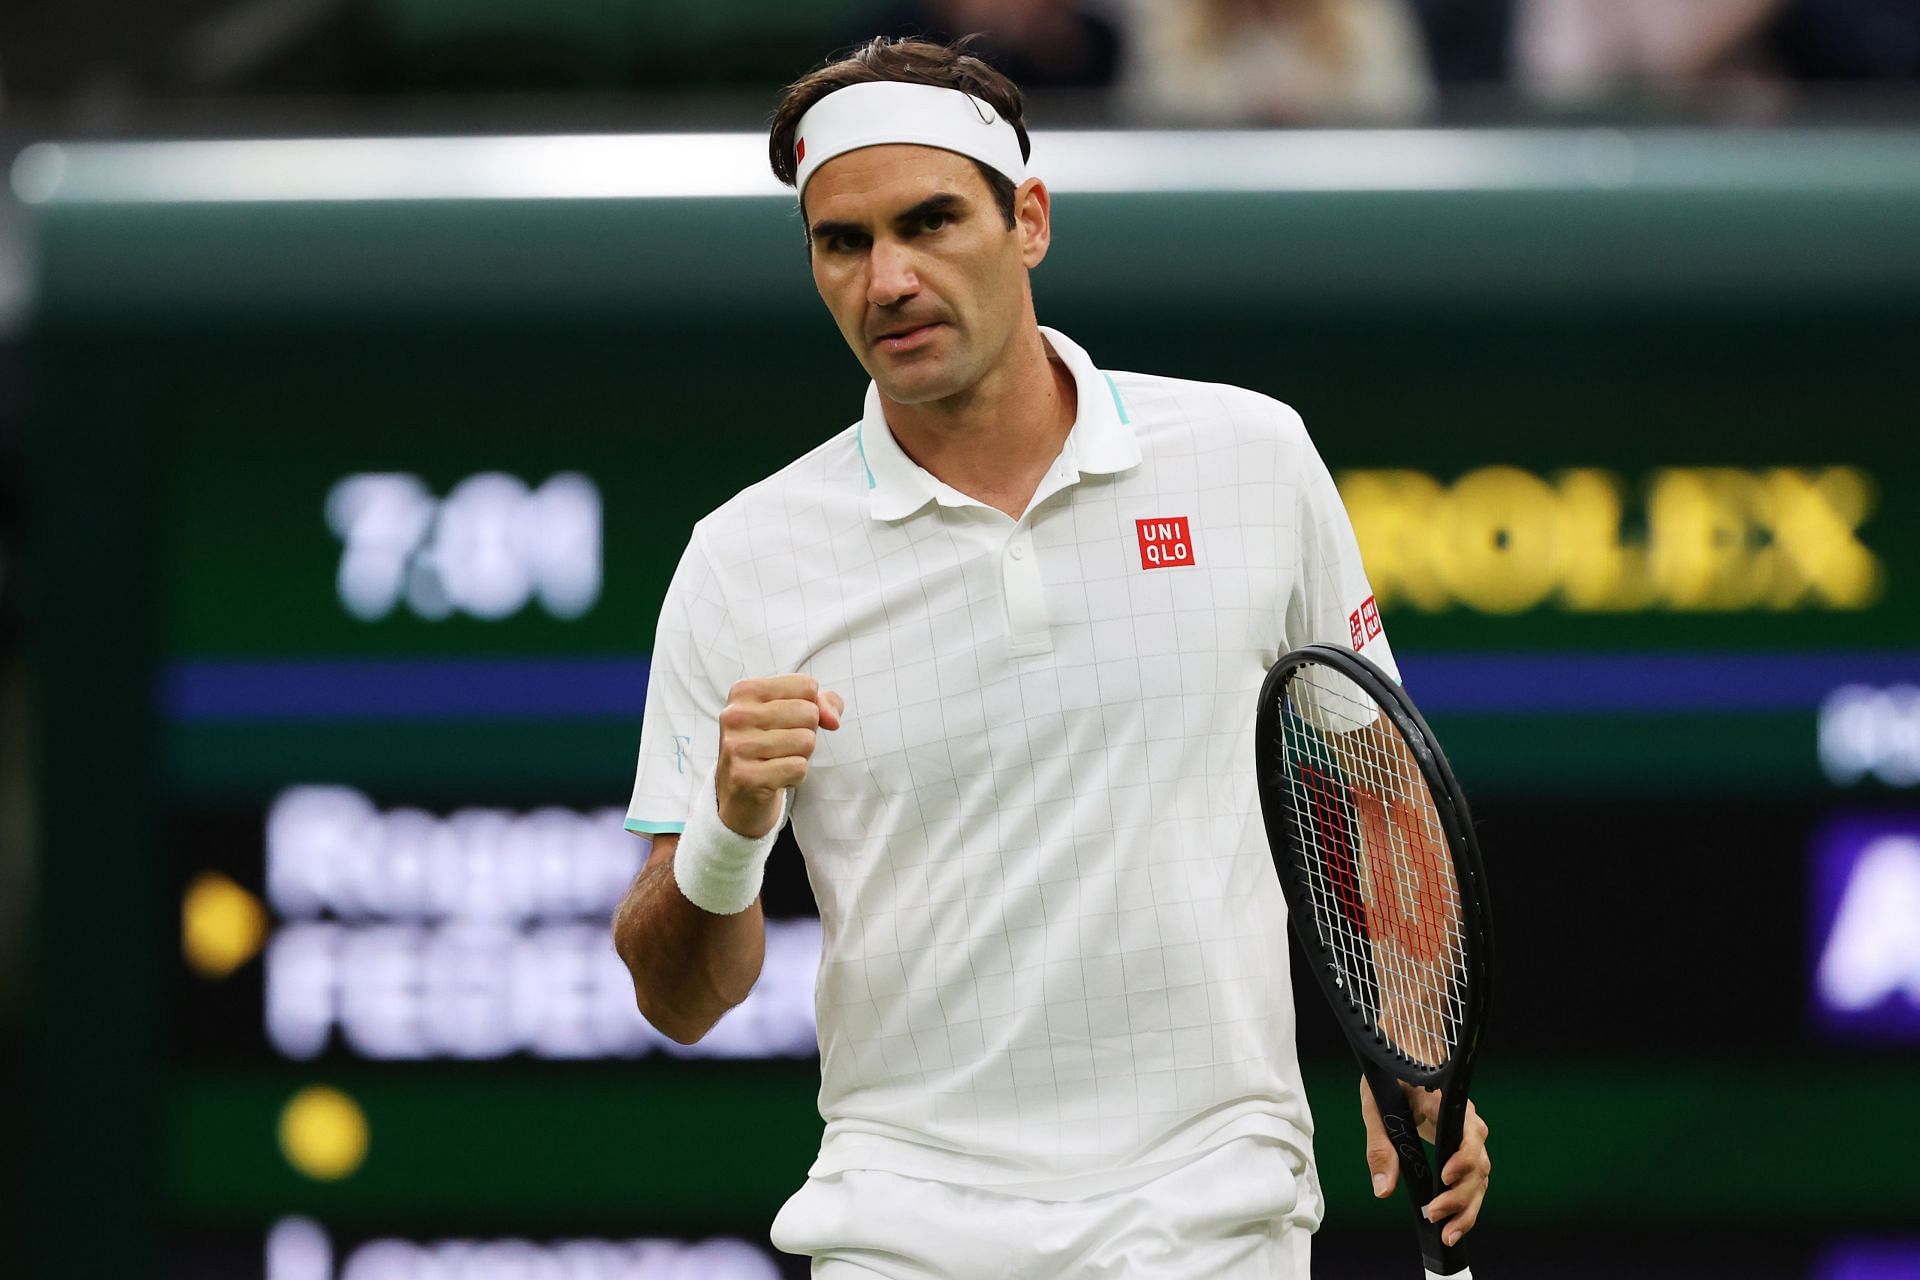 UNIQLO Introduces New Roger Federer DRY-EX Replica Game Wear And